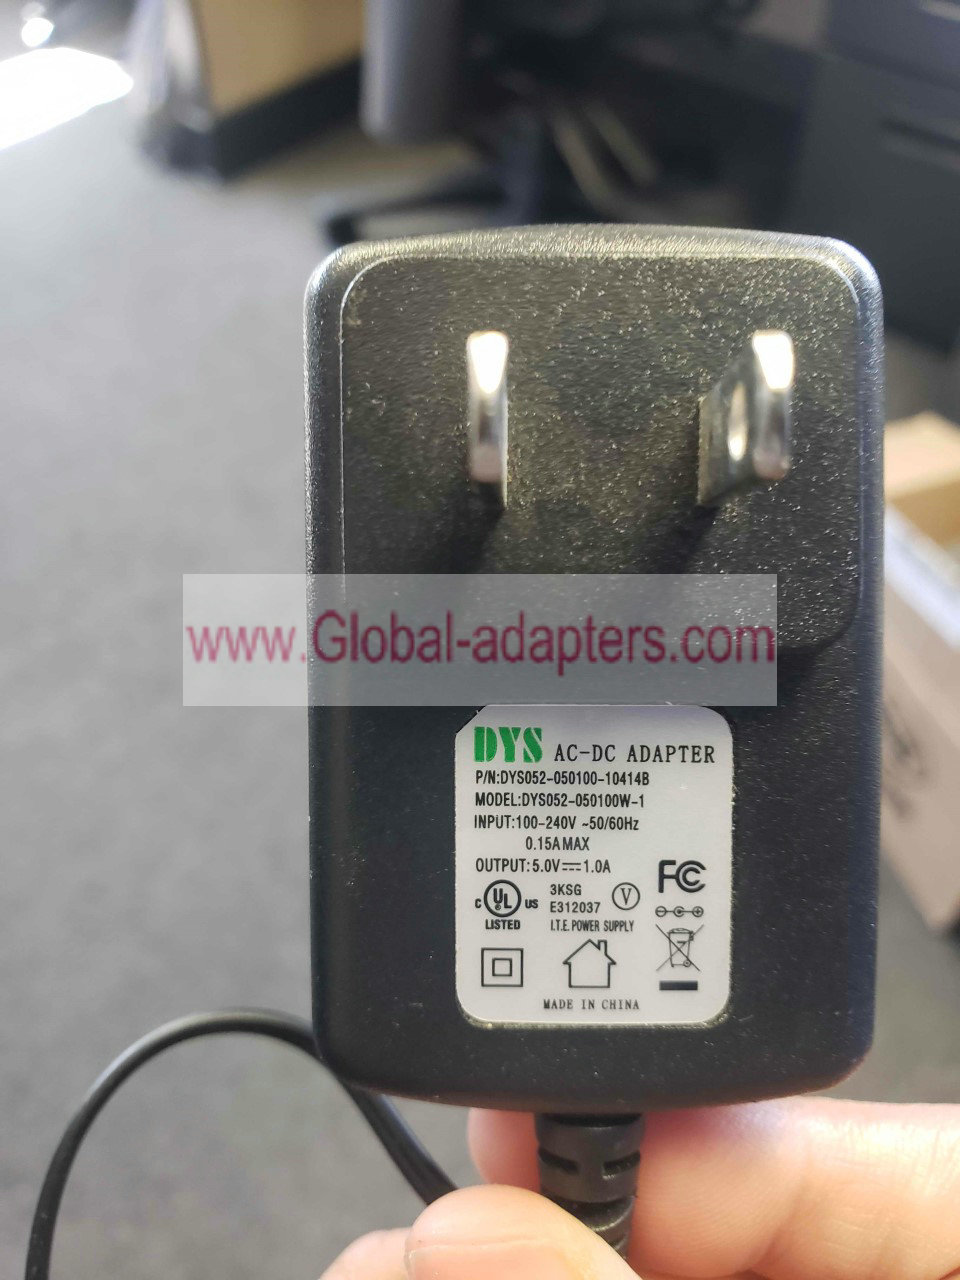 New DYS DYS052-050100W-1 DYS052-050100-104148 AC-DC ADAPTER Power Adapter 5.0V 1.0A